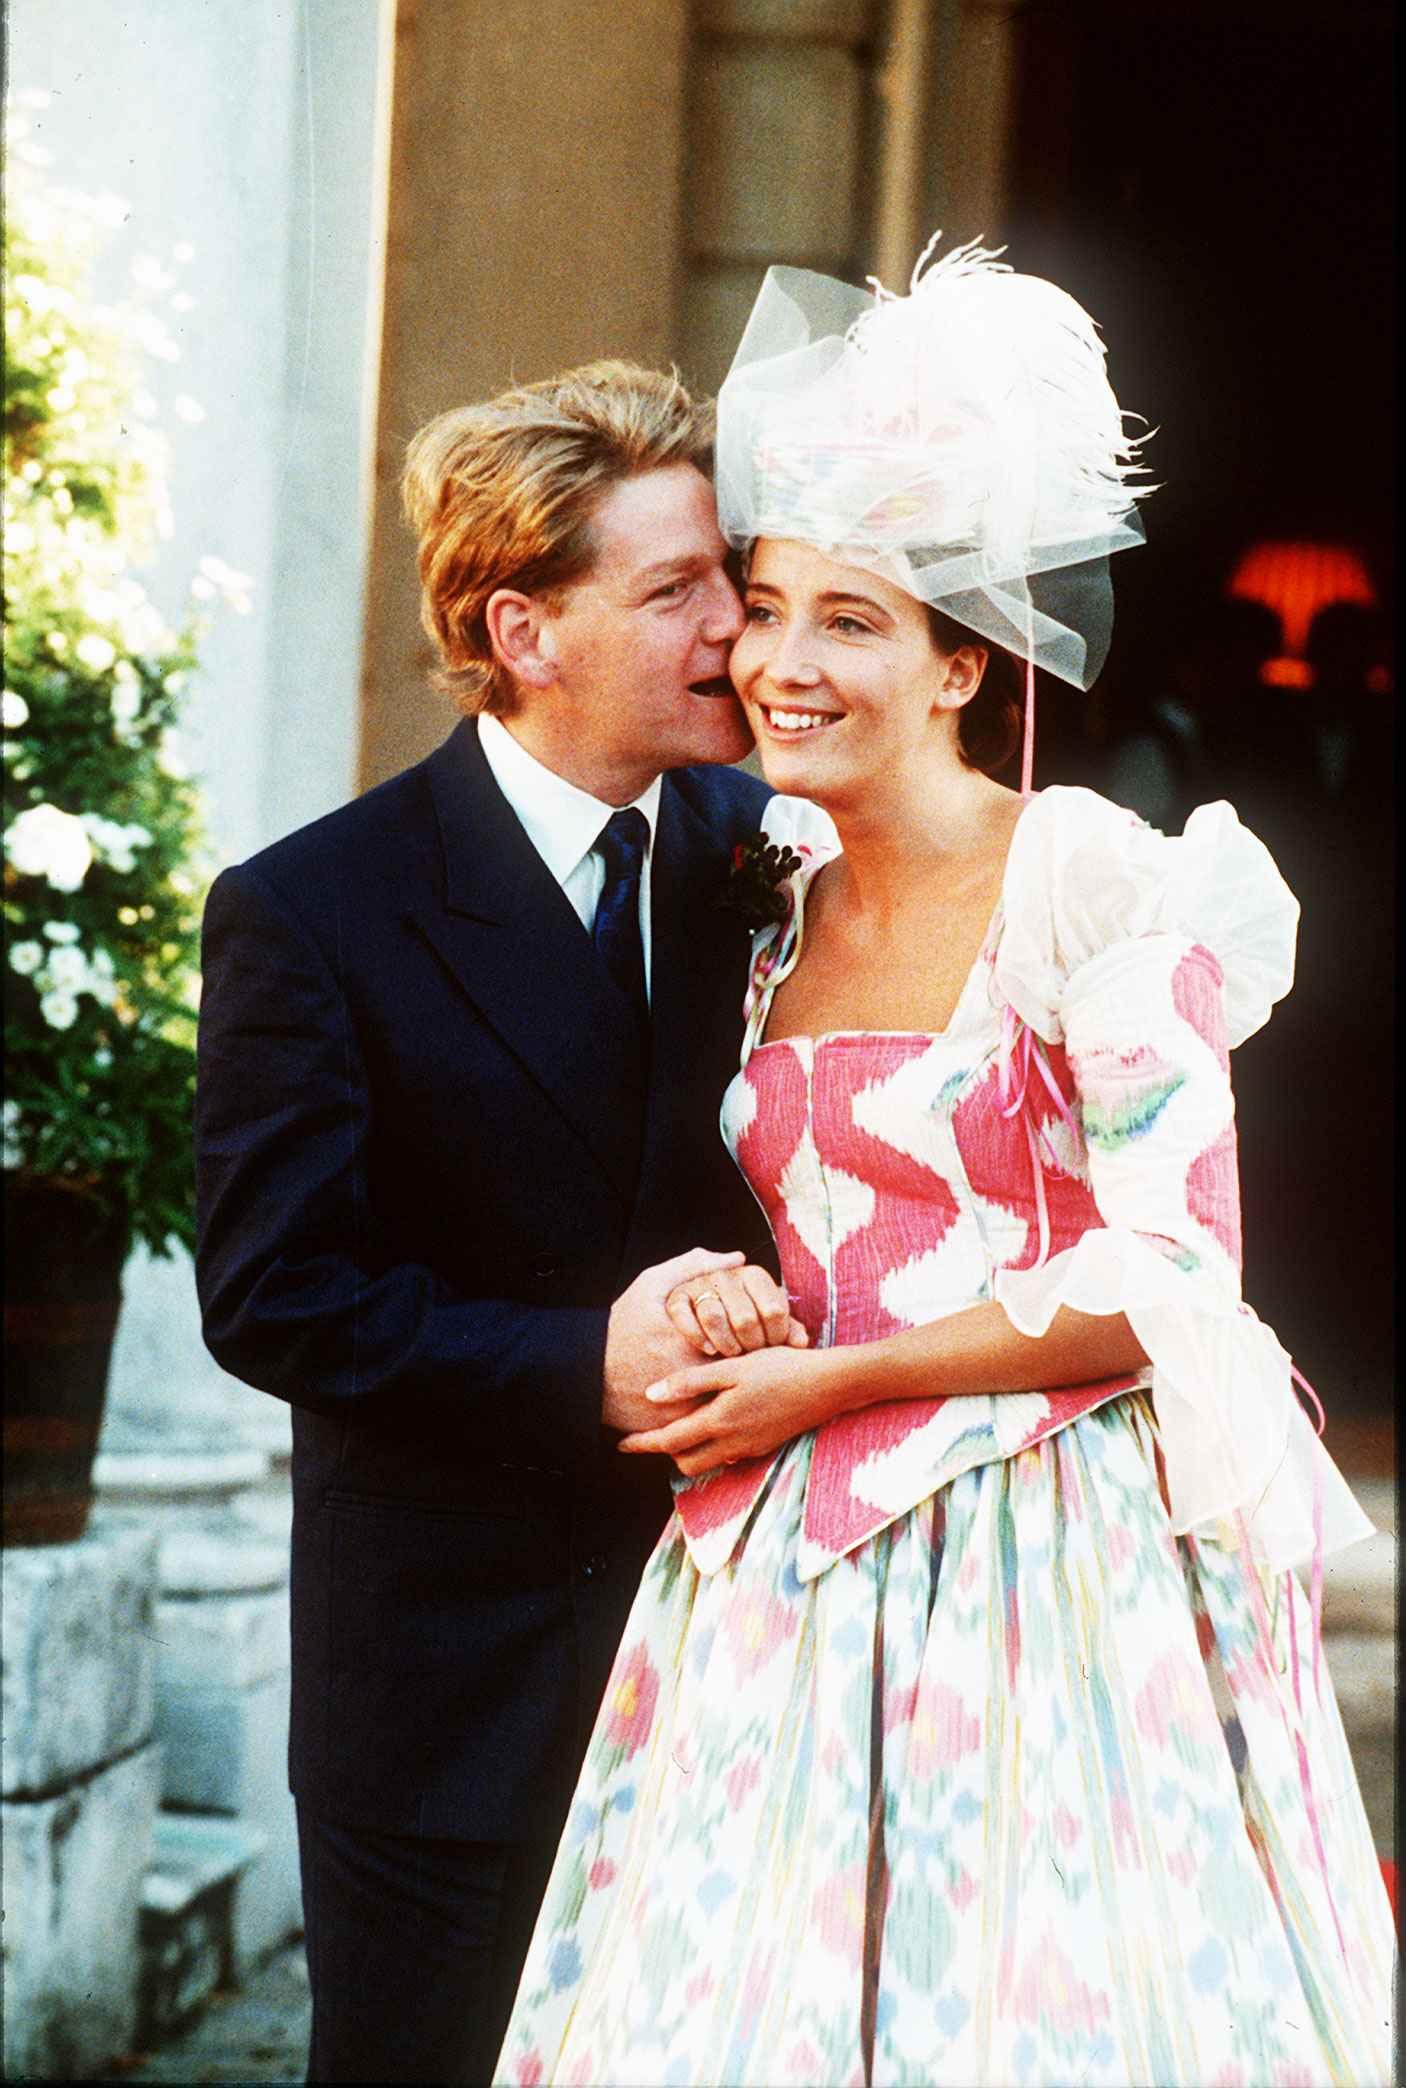 Kenneth Branagh getting married to actress Emma Thompson